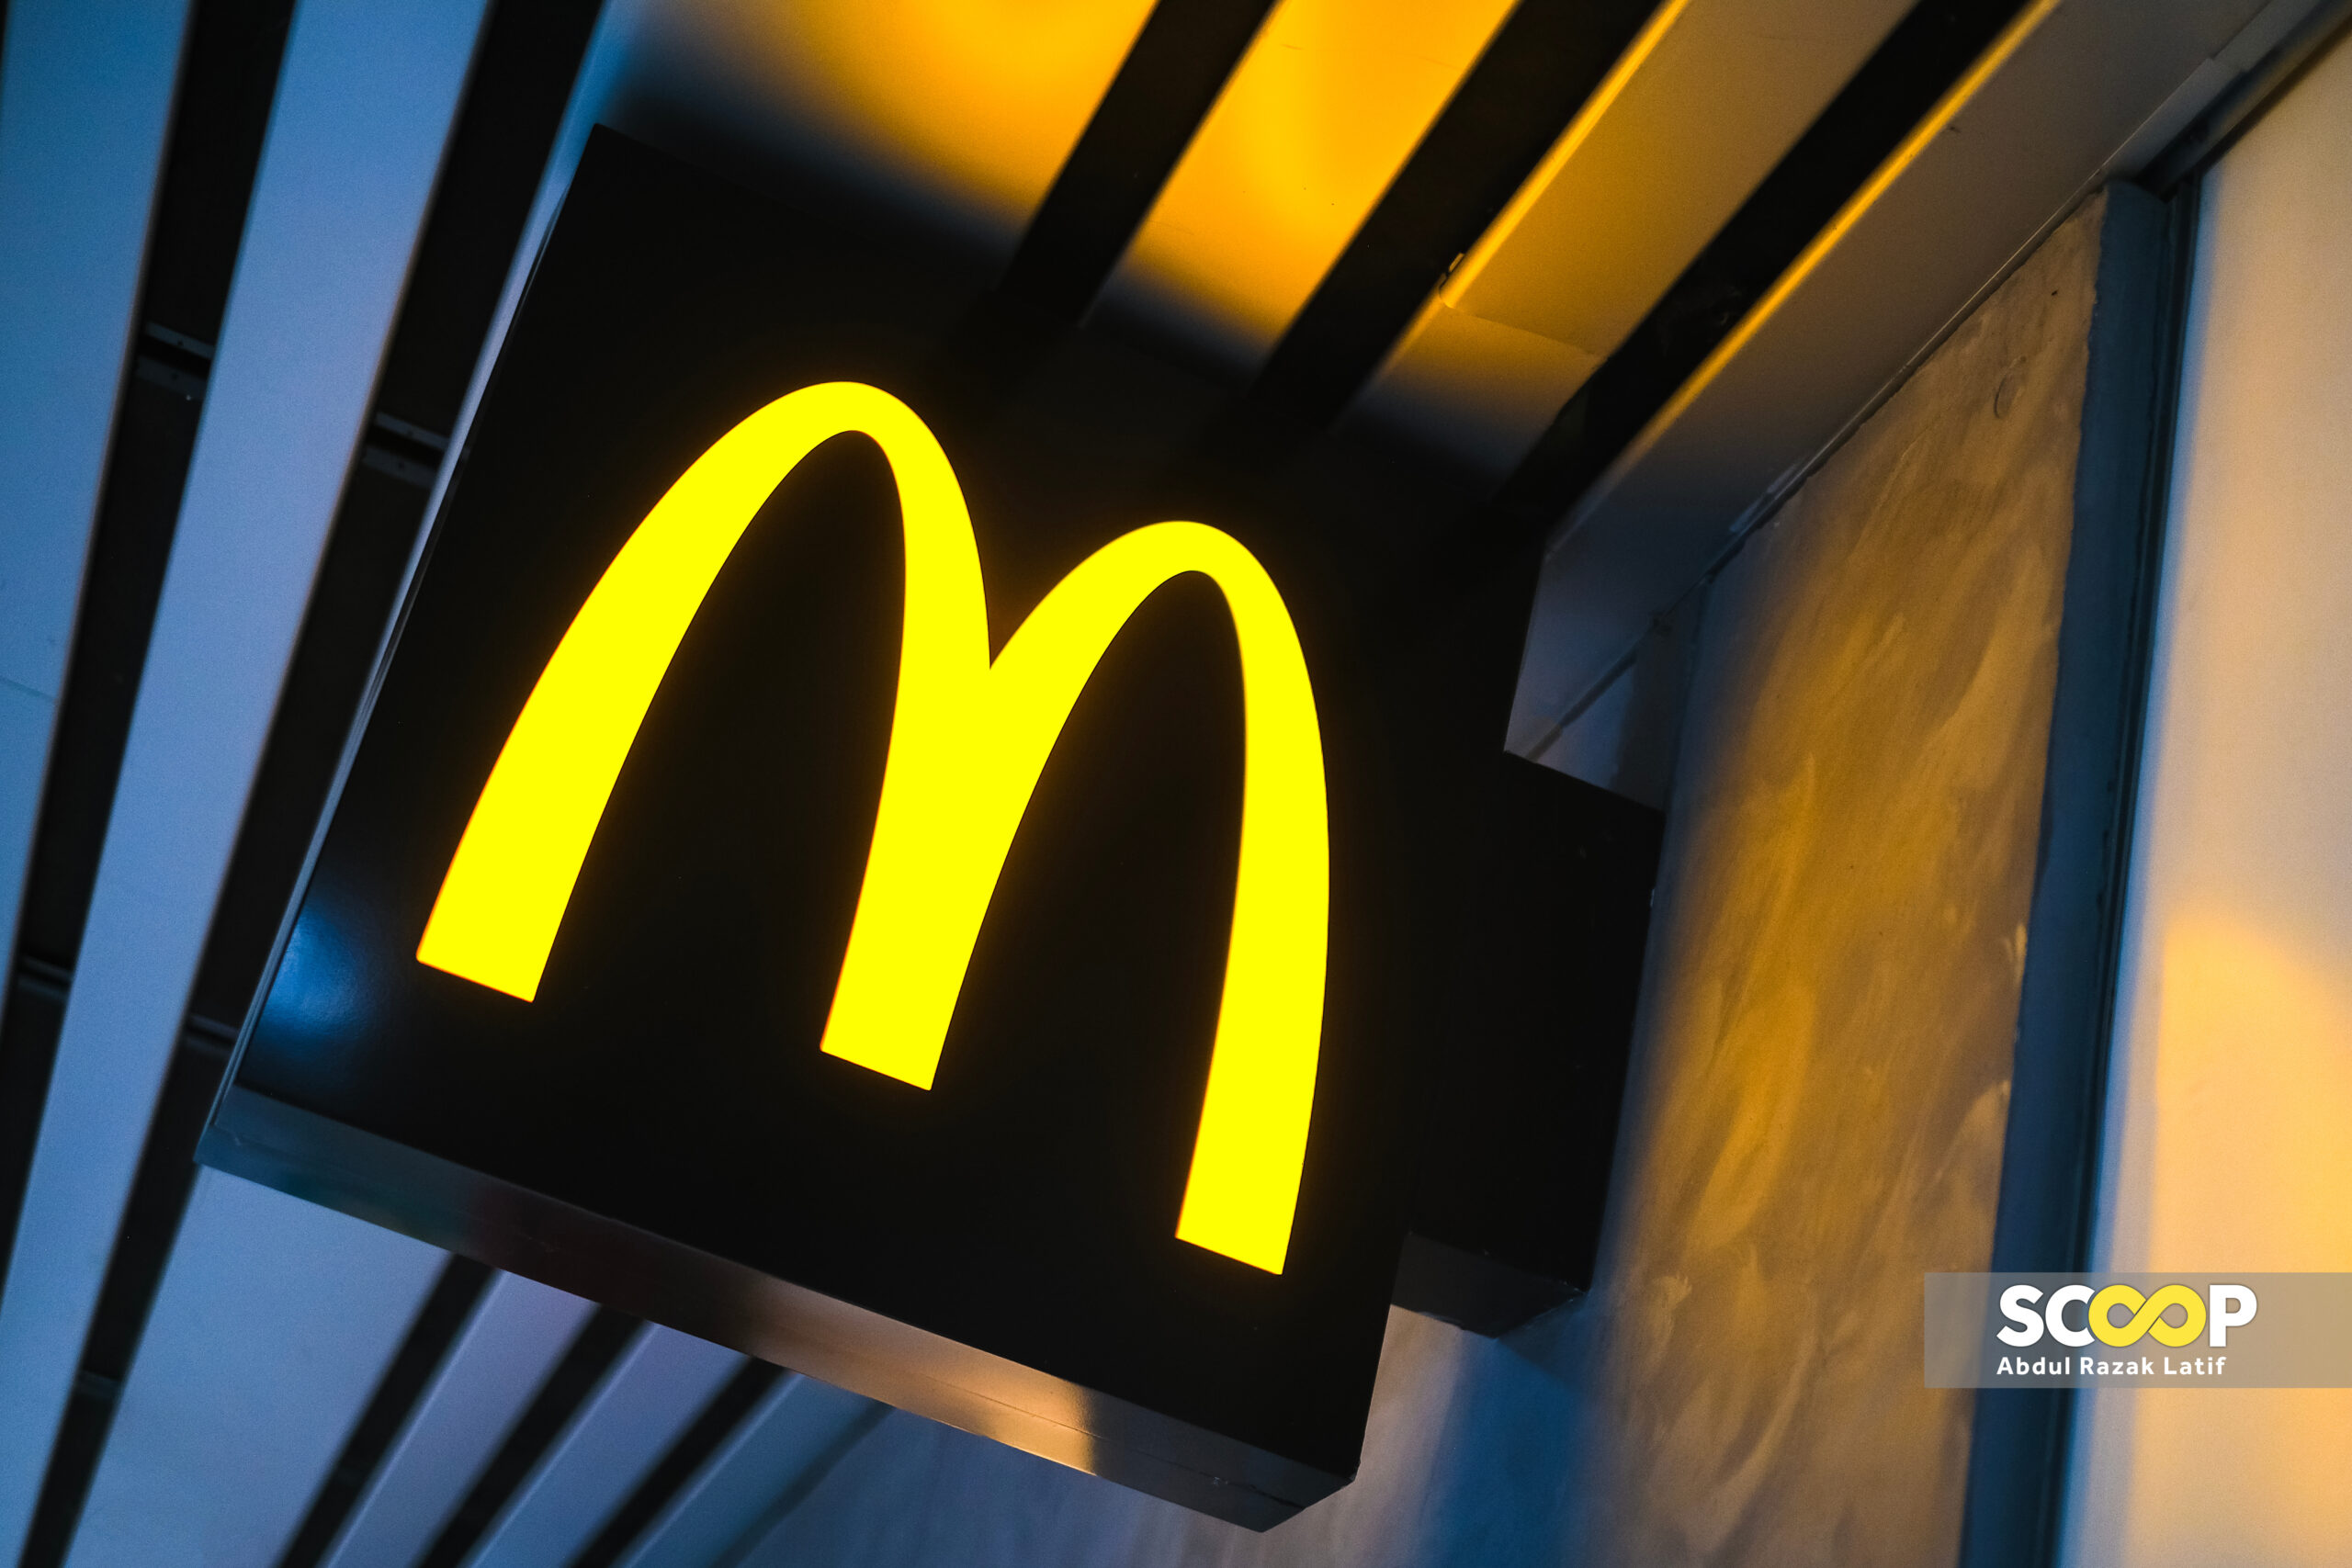 McDonald’s boycott impactful as fast-food chain buys 225 outlets in Israel